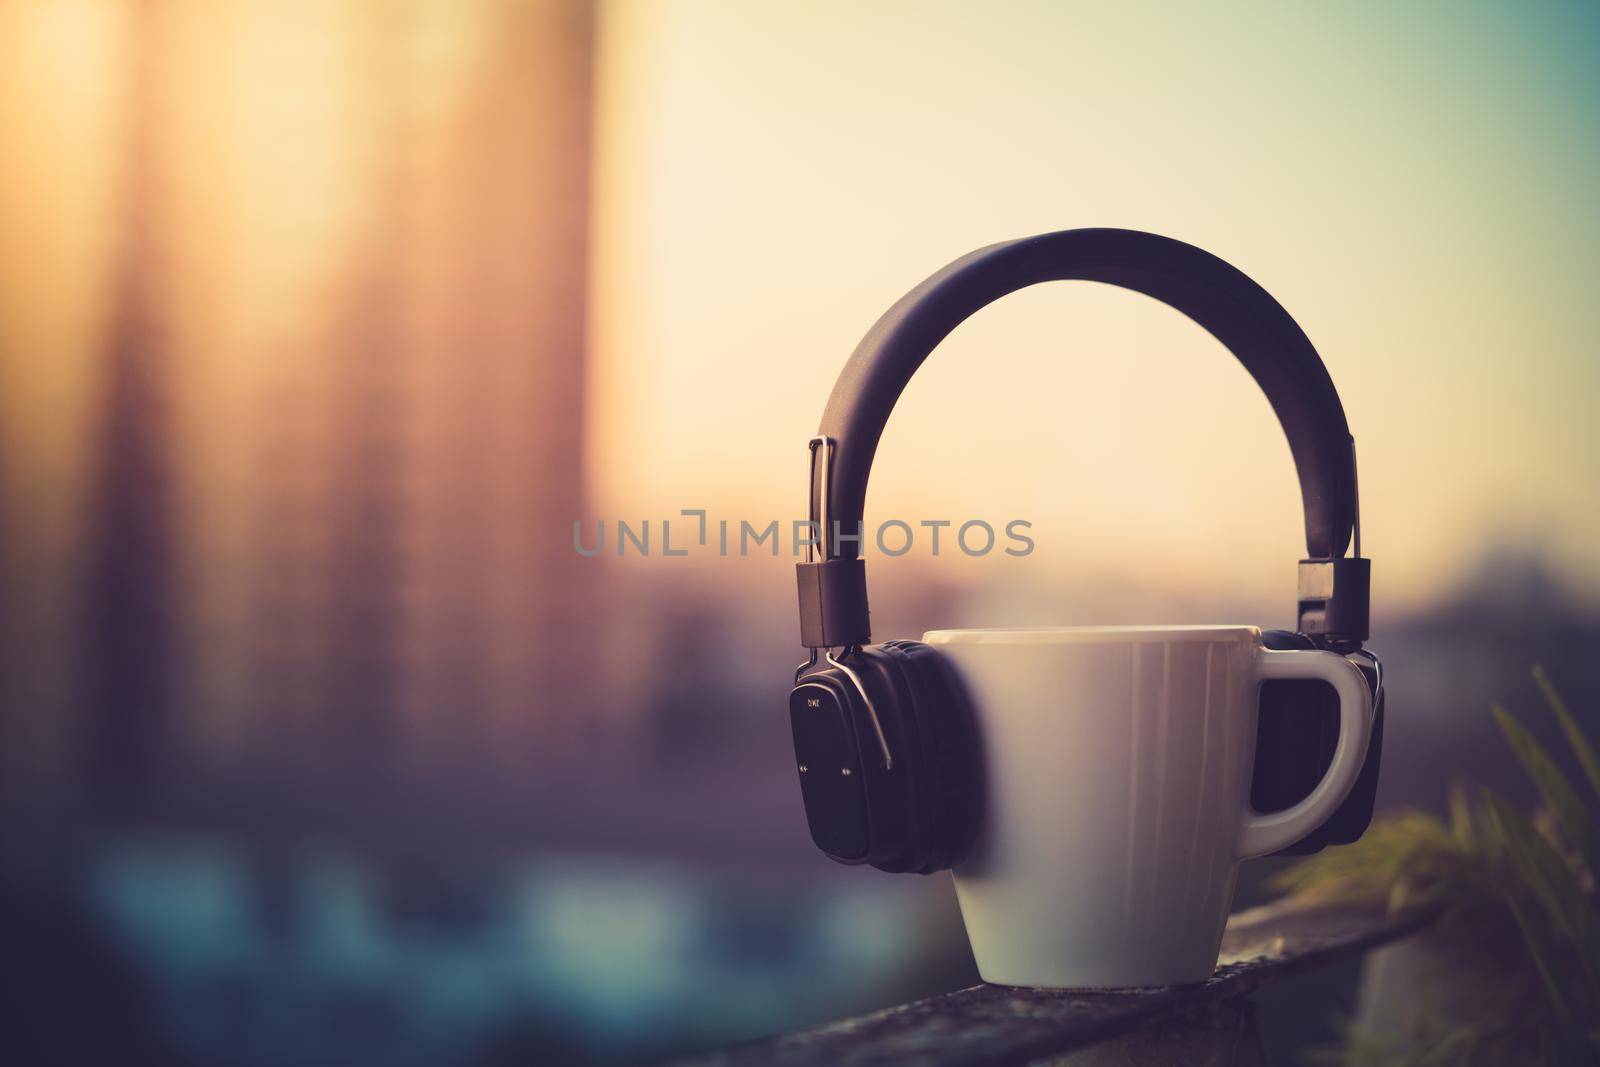 Headphones and coffee cup on blurred city background. Music concept. View of sunrise time, Vintage tone filter